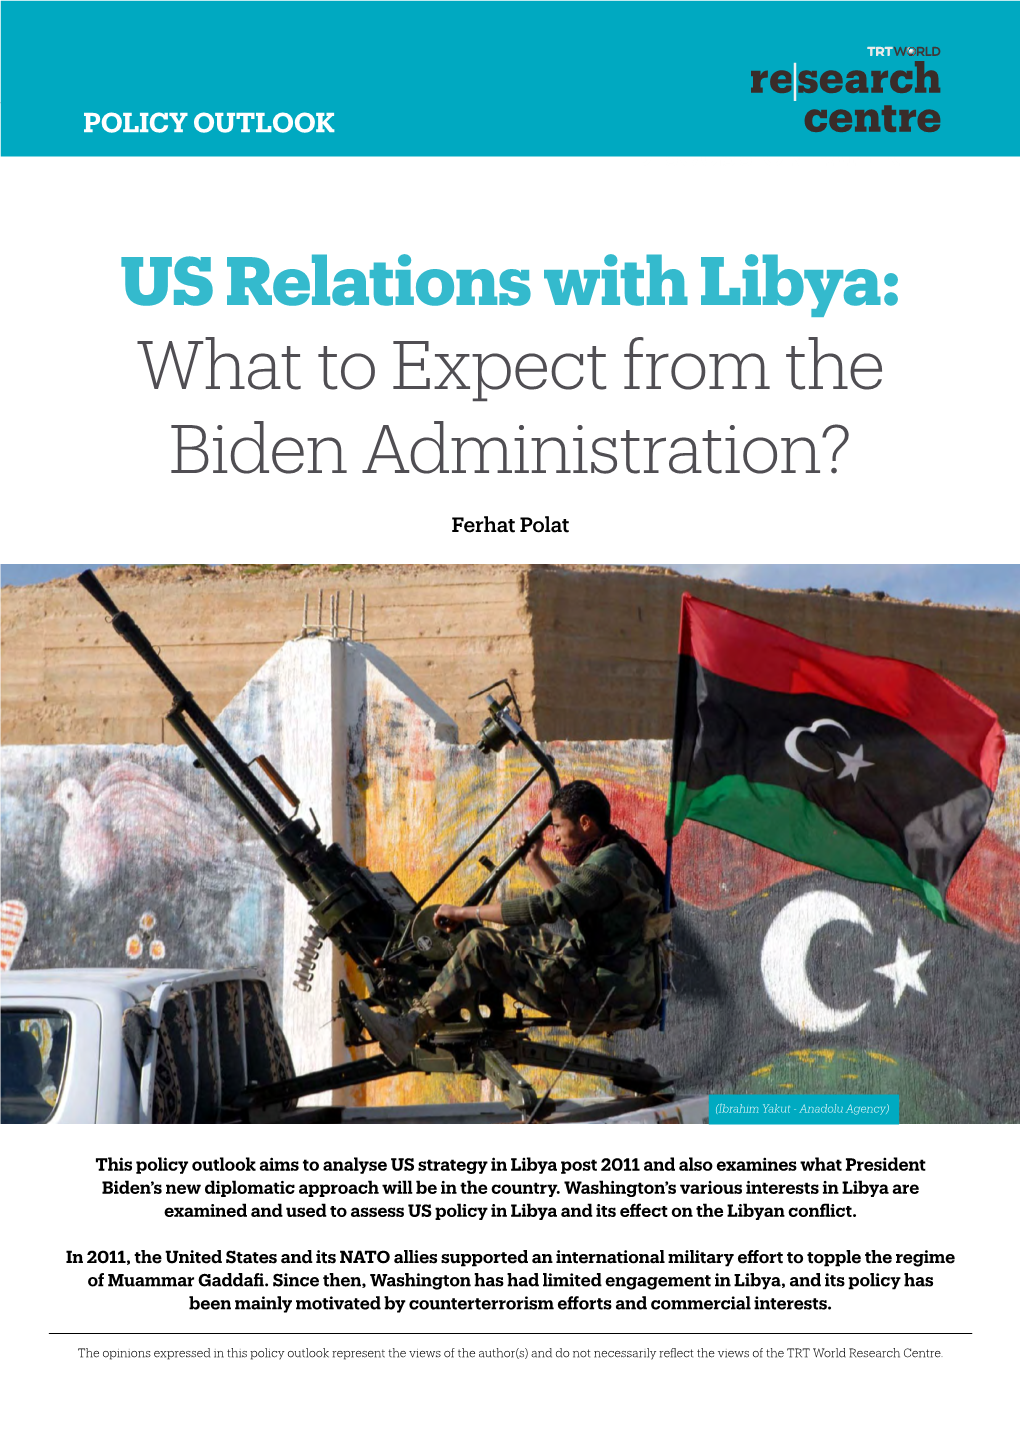 US Relations with Libya: What to Expect from the Biden Administration?